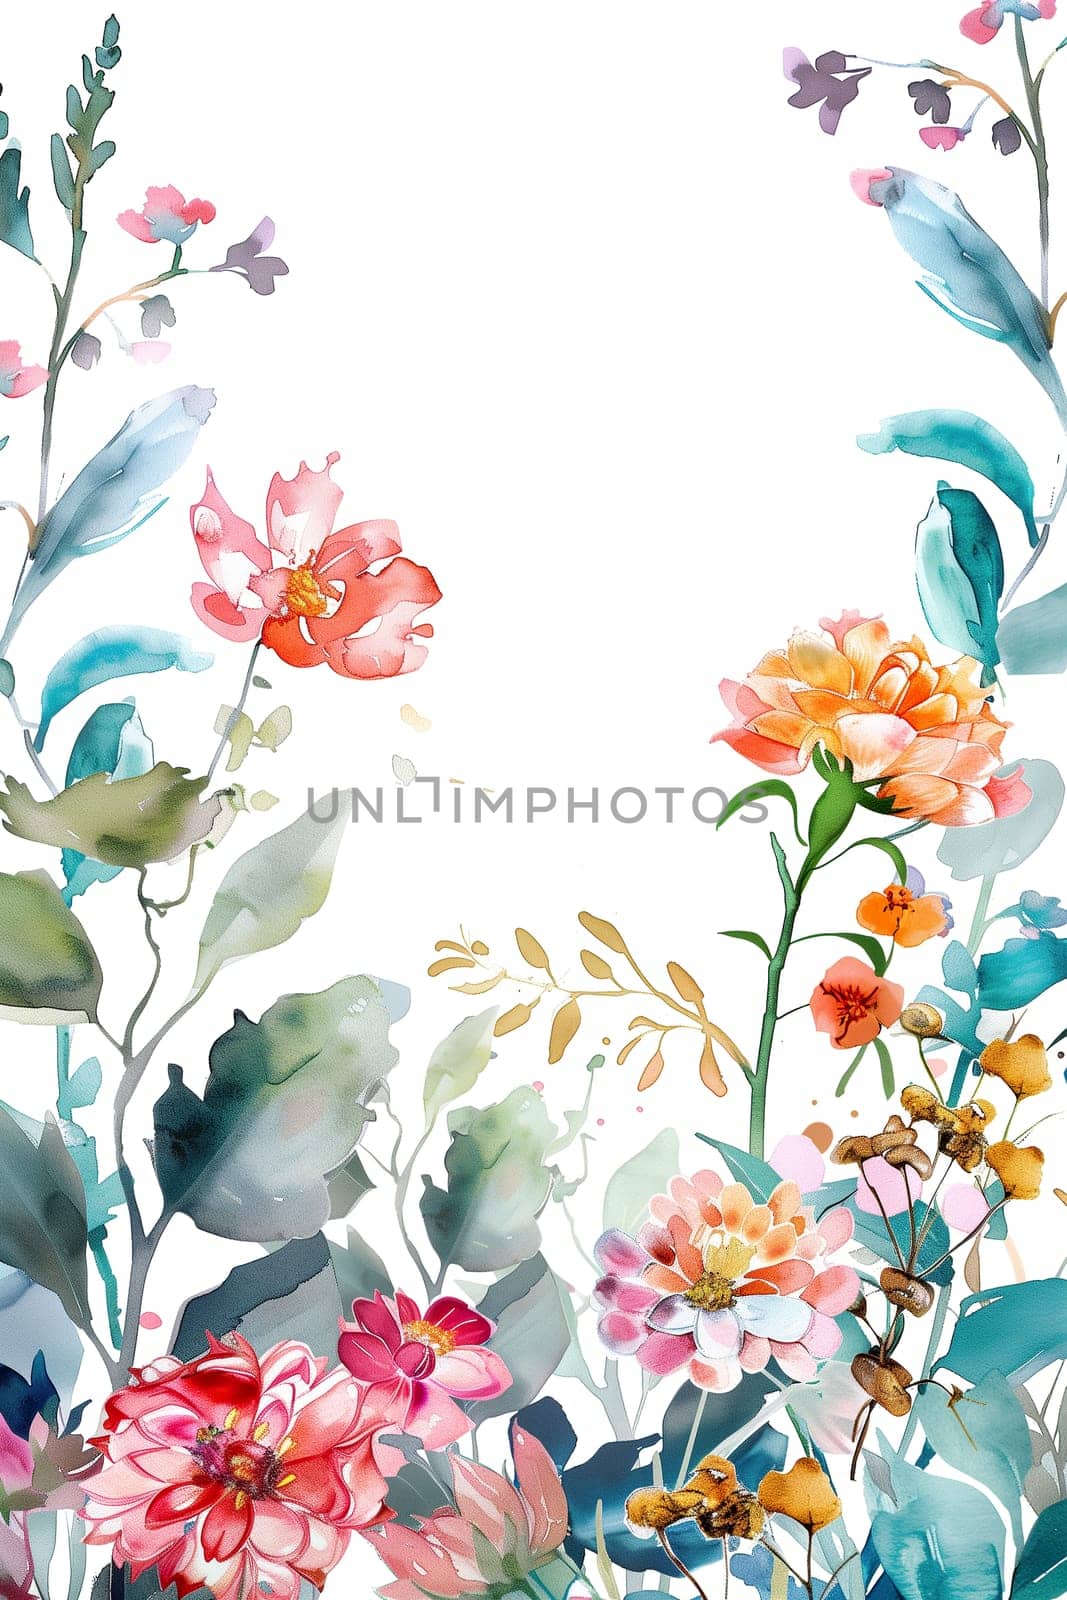 Painted watercolor floral border or frame for wedding invitations by Dustick